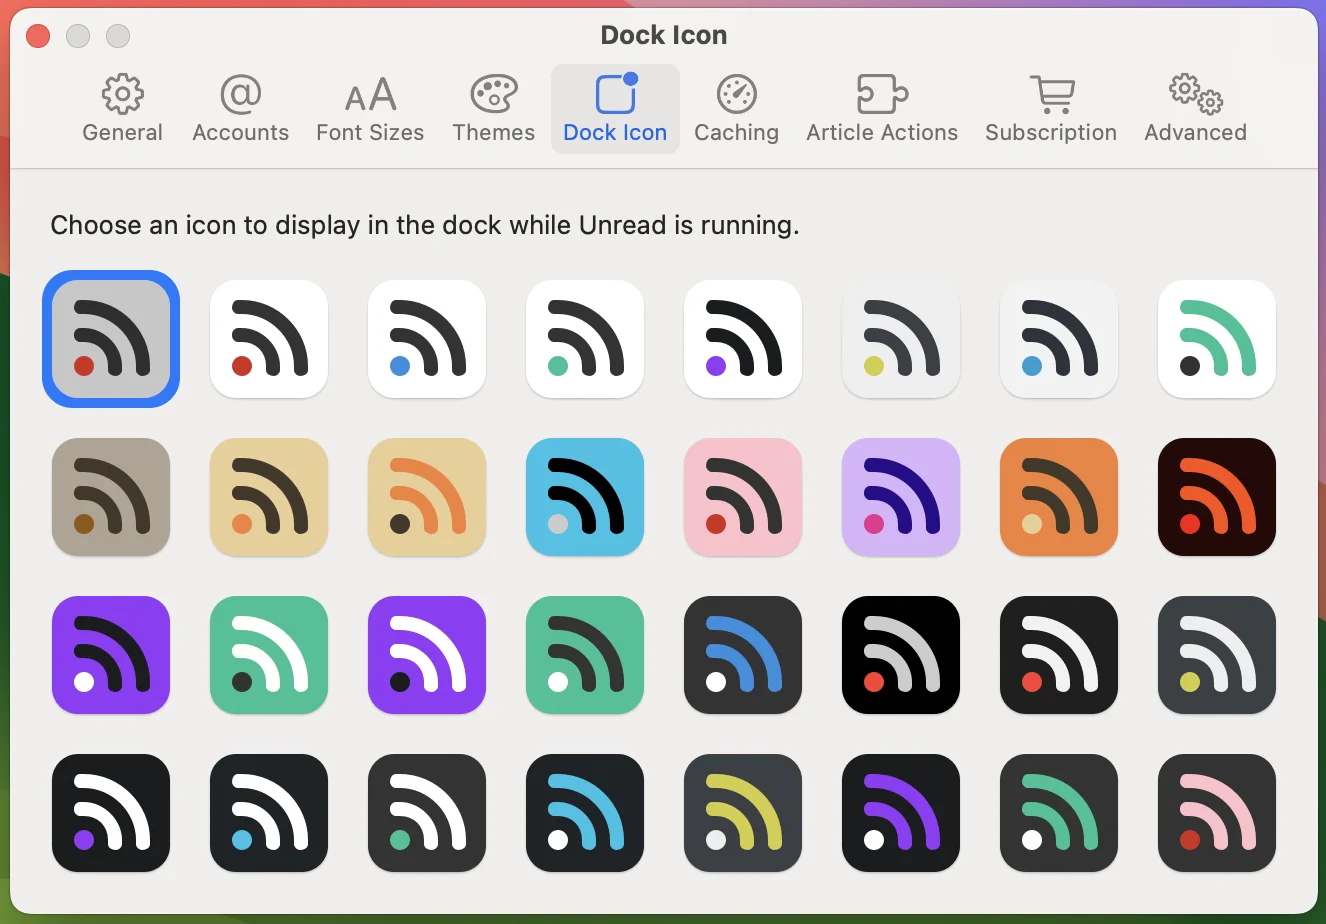 The Dock Icon Settings pane letting you choose between 32 variations of Unread’s dock icon.